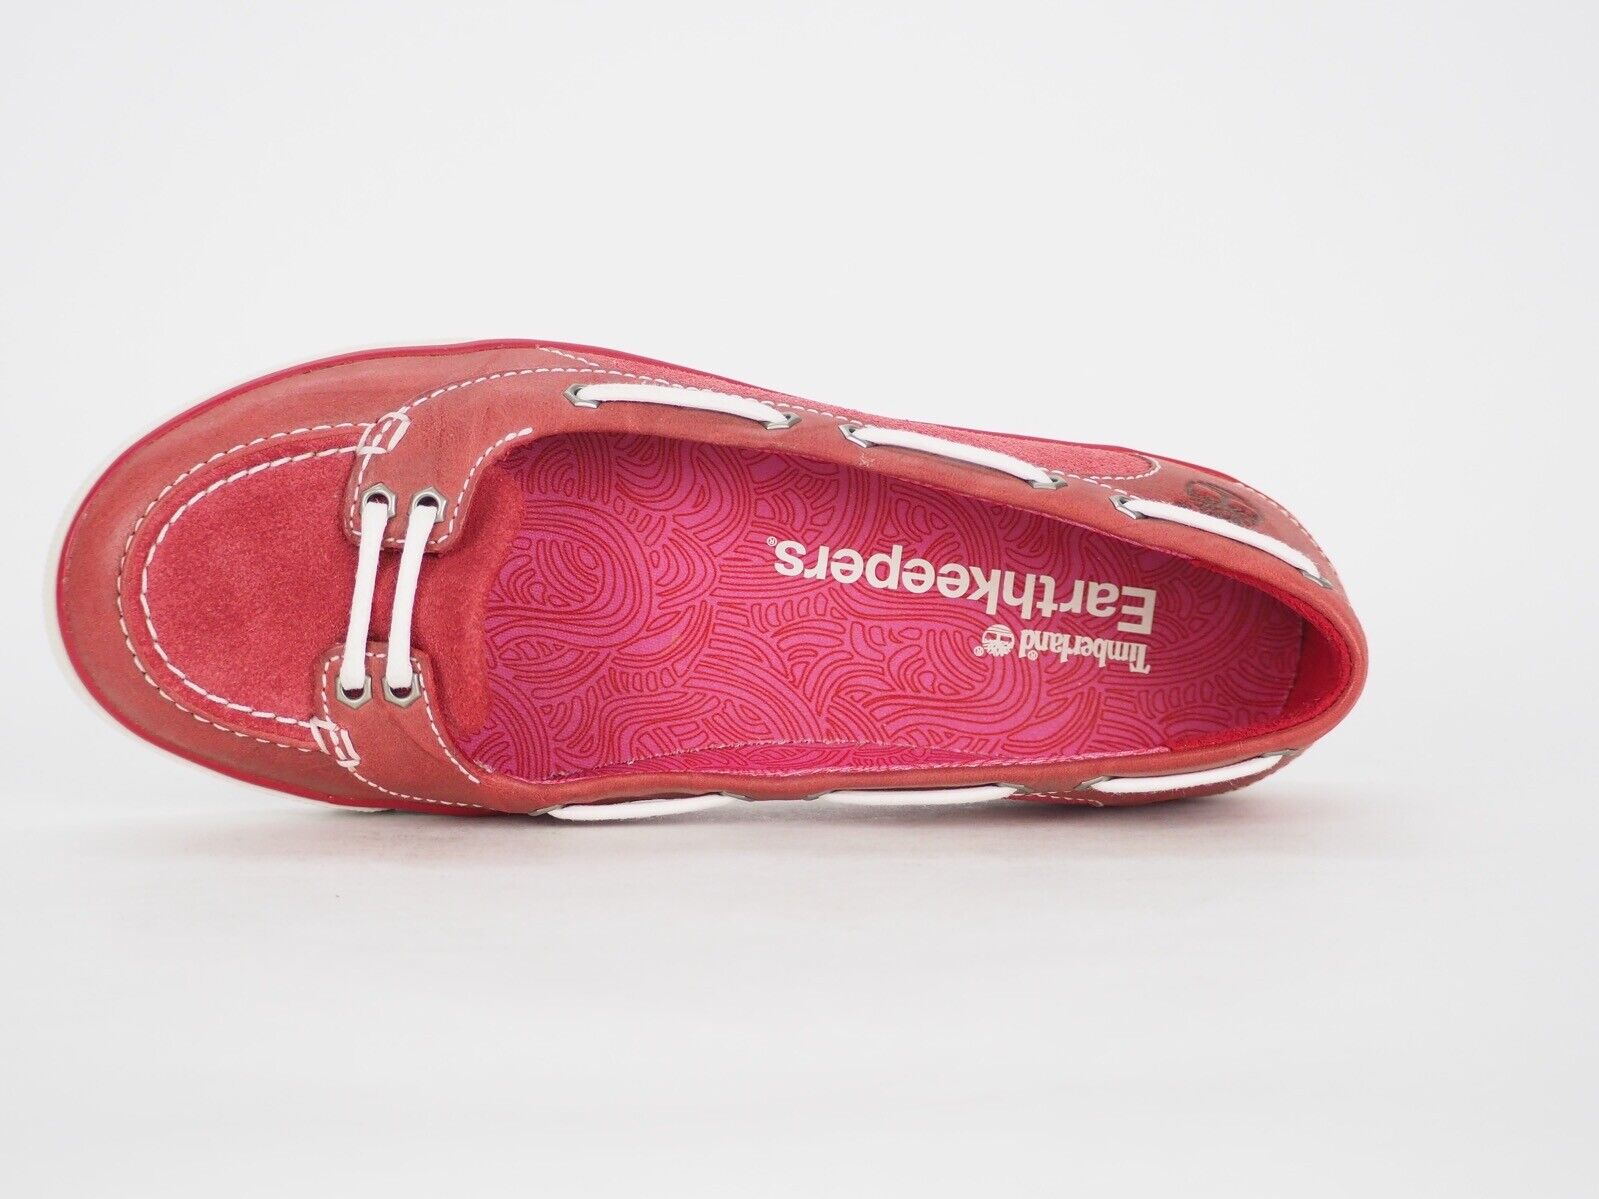 Womens Timberland Deering 27621 Red Leather Casual Moccasins Flat Shoes UK 3.5